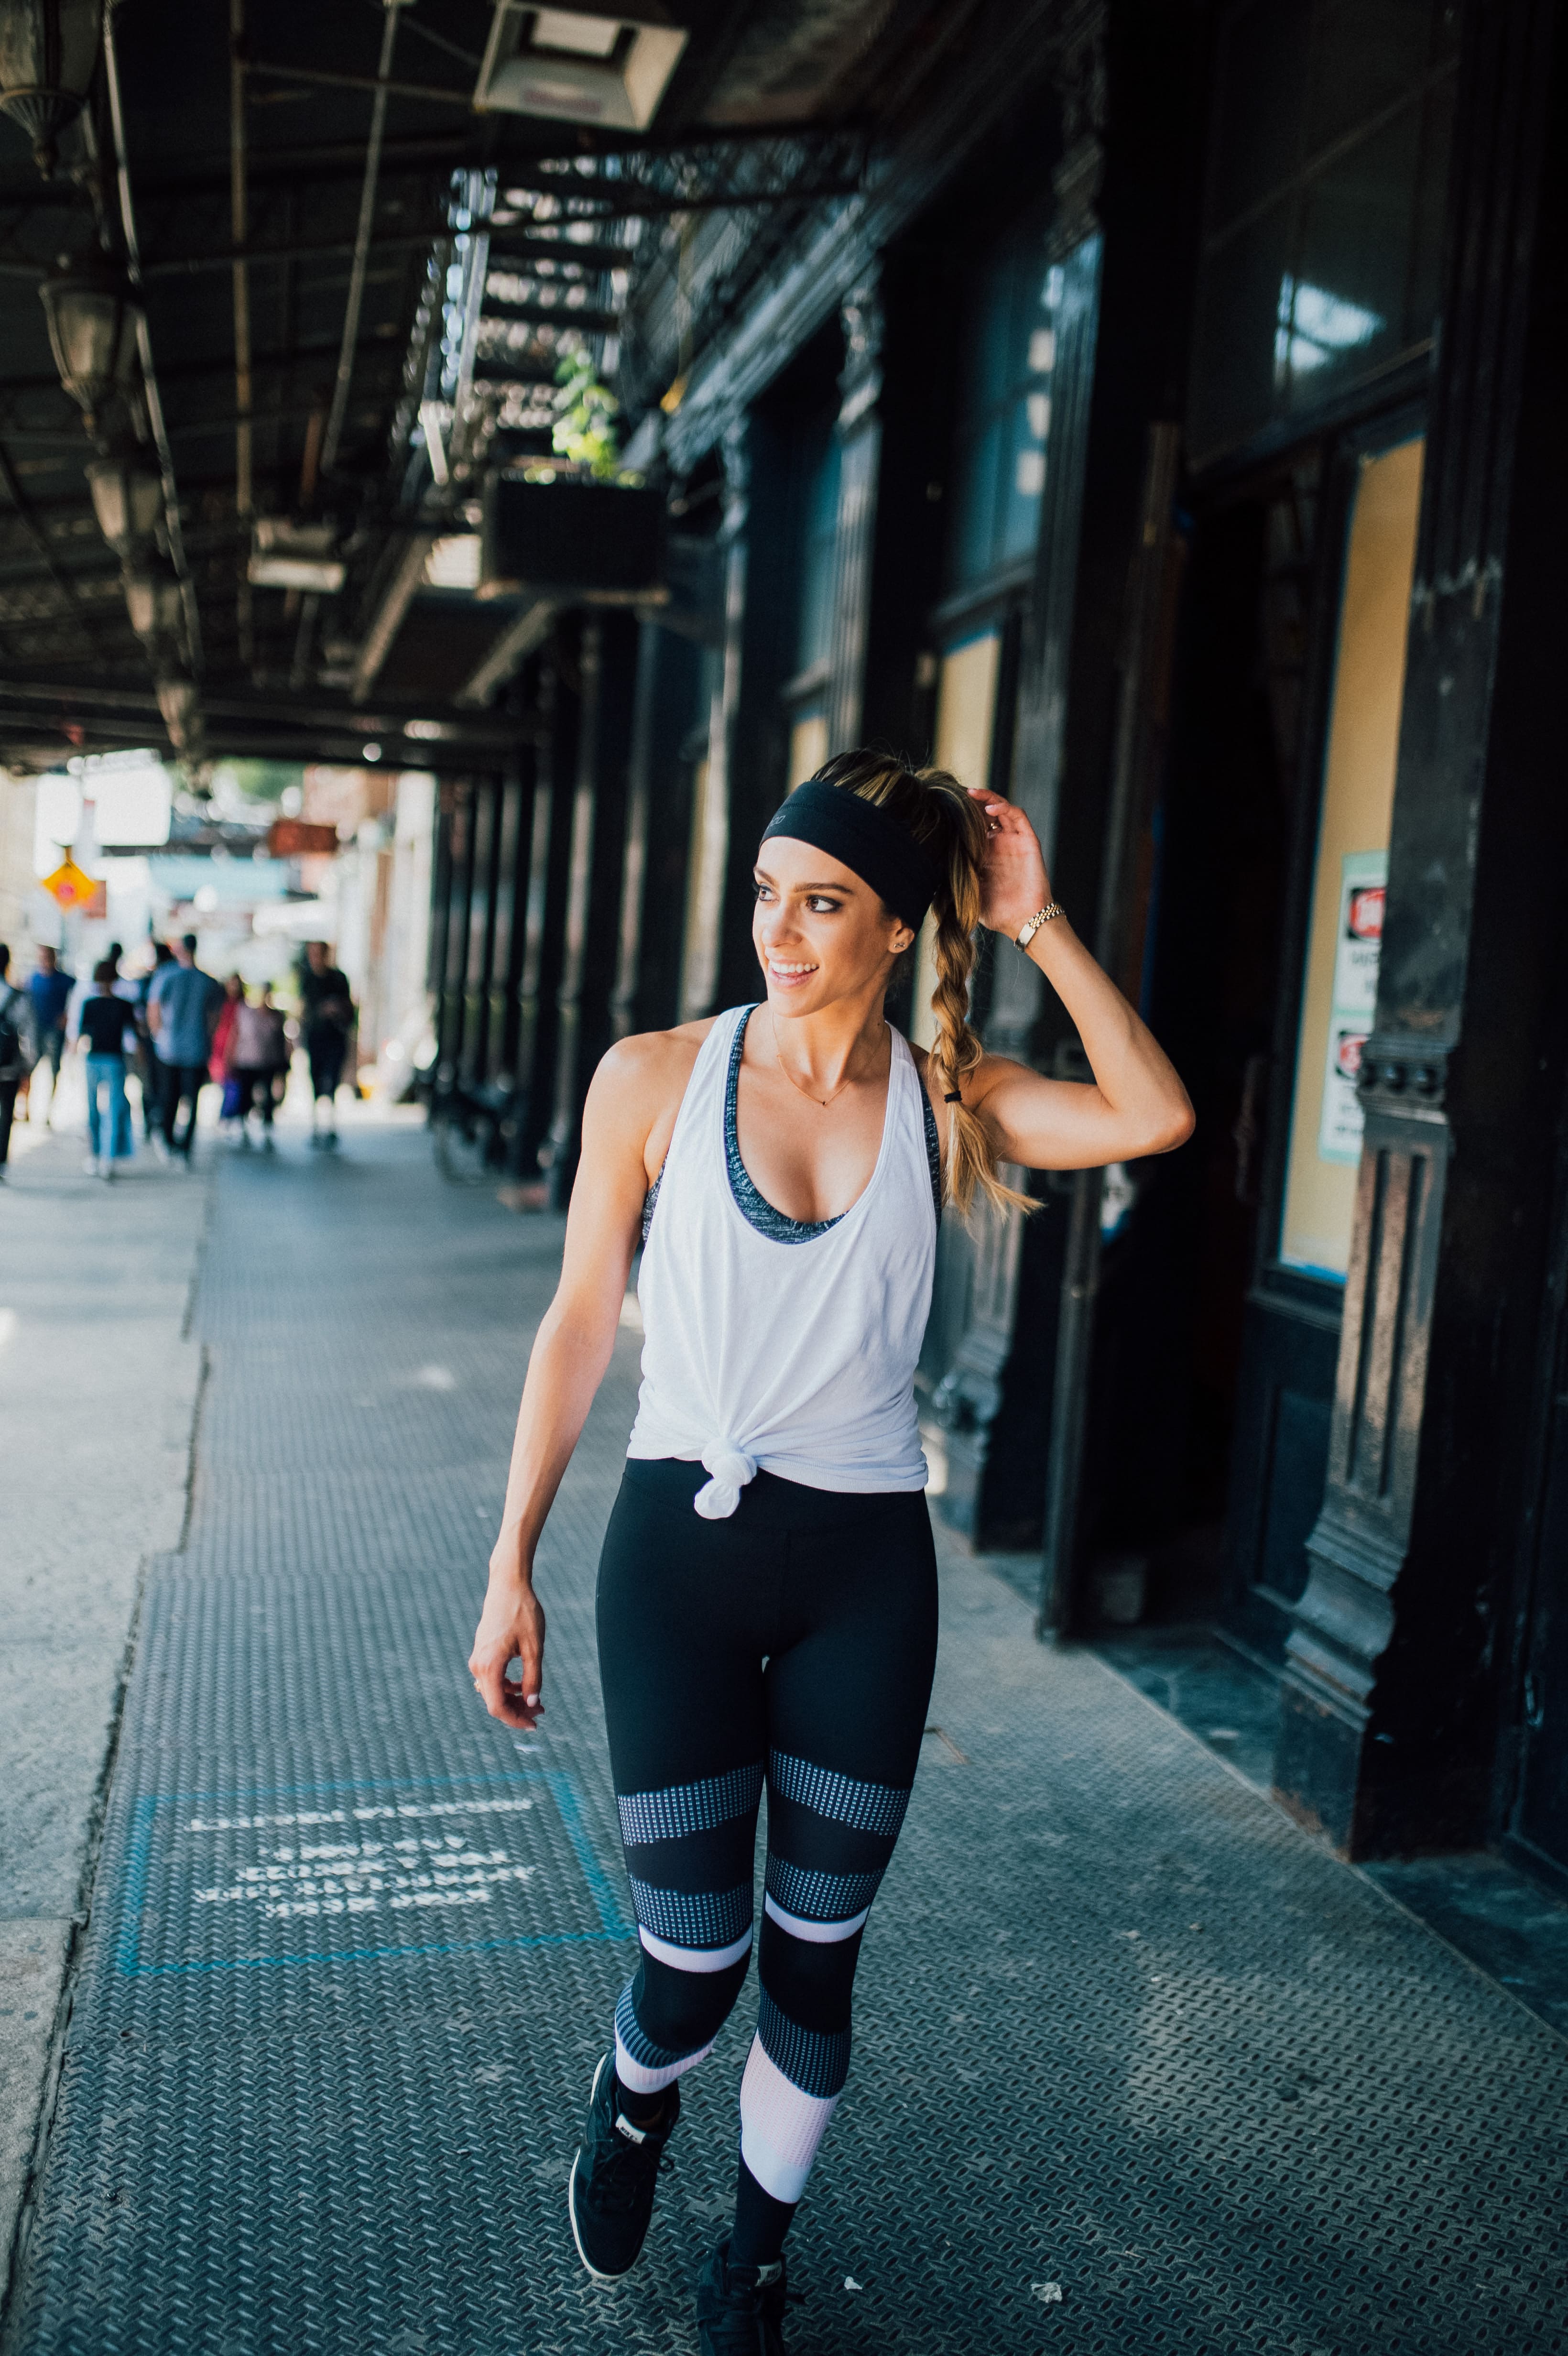 FIT FASHION: New York Minute